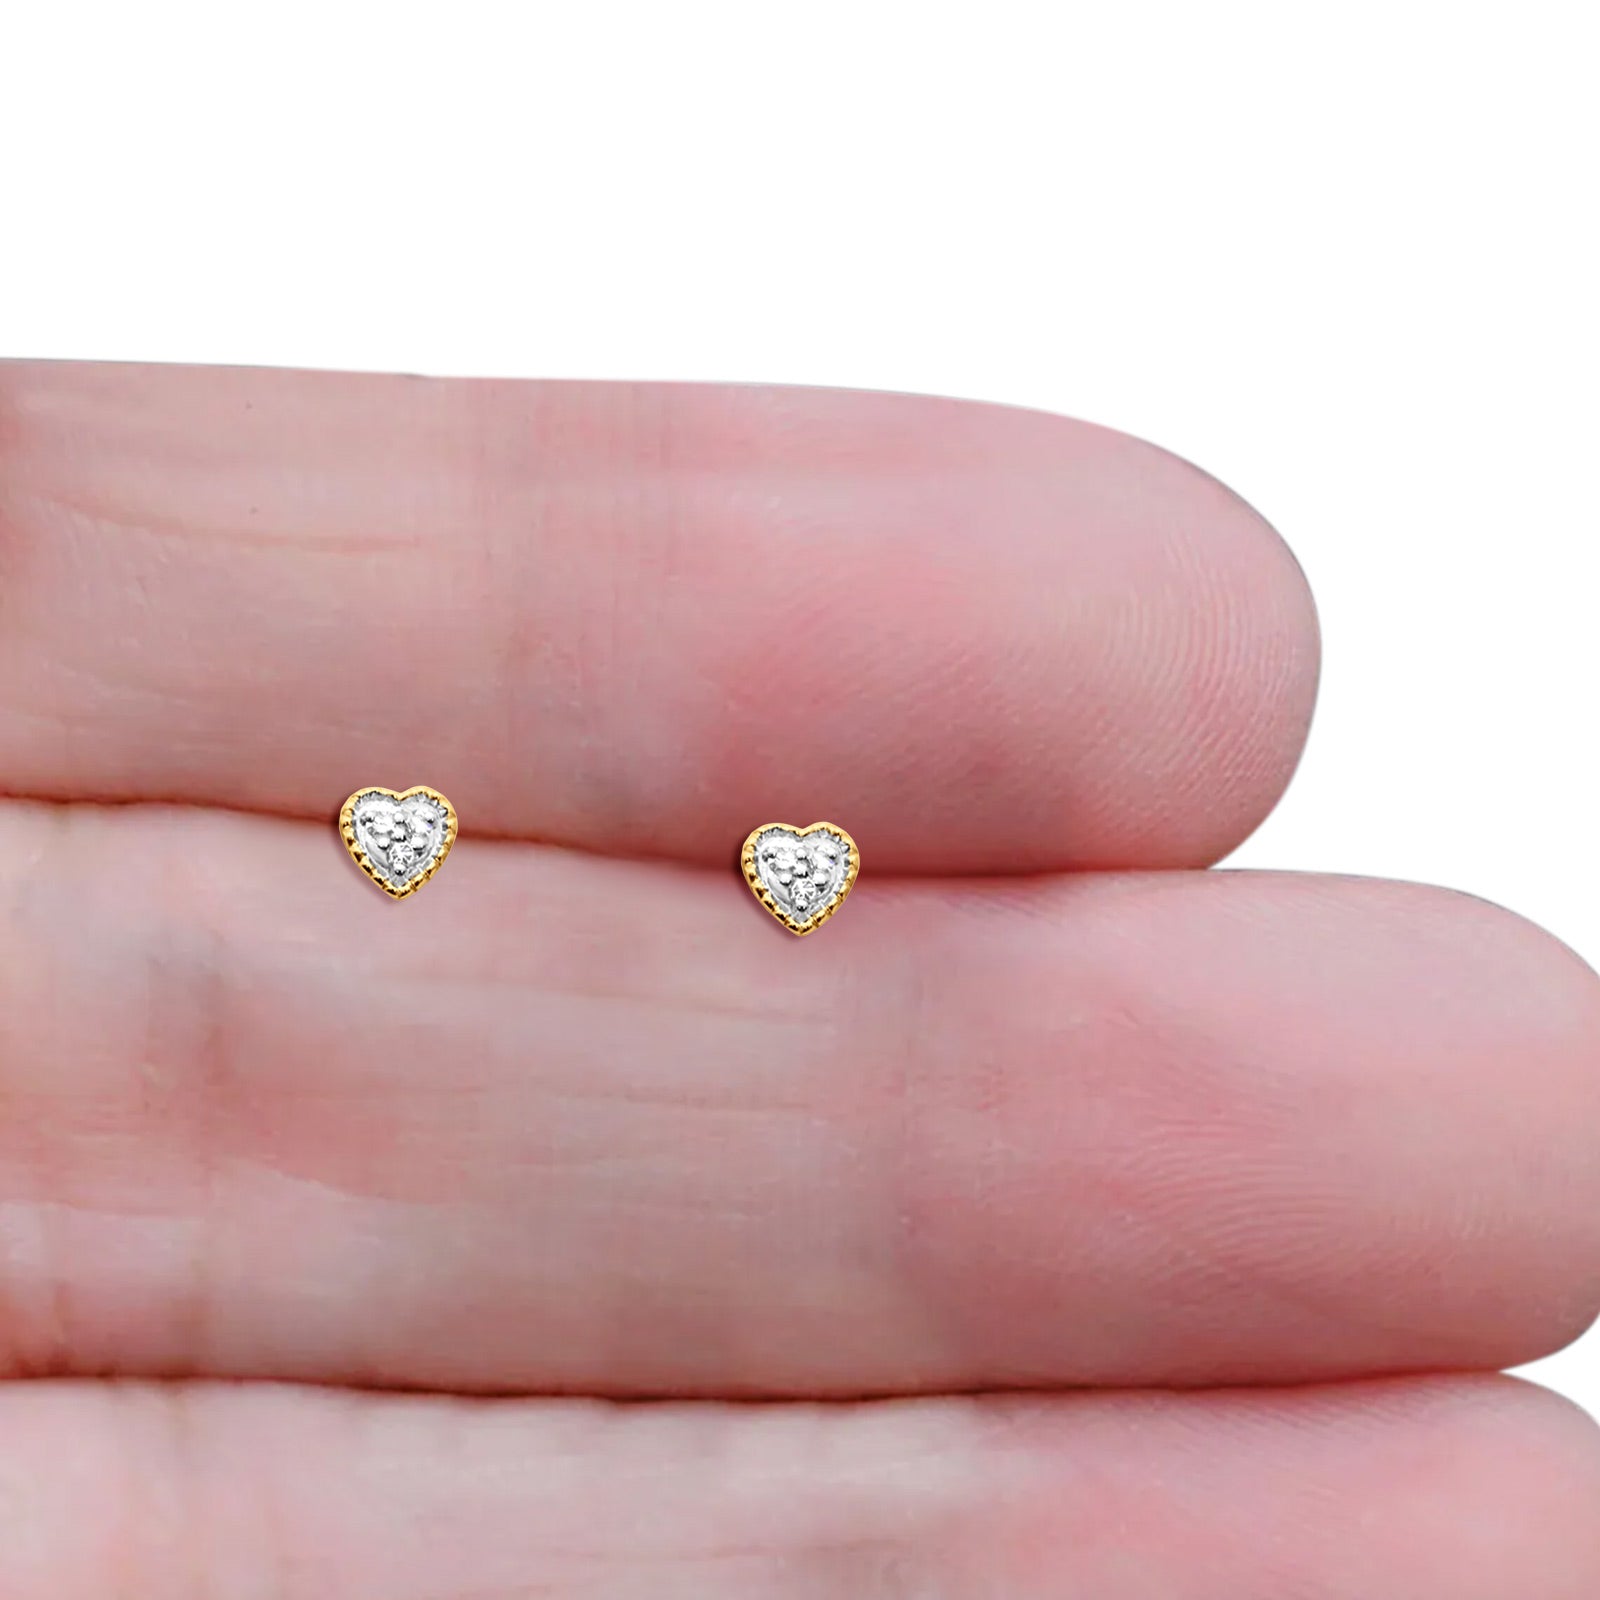 Solid 10K Gold 4.4mm Two Tone Heart Shaped Round Diamond Stud Earrings